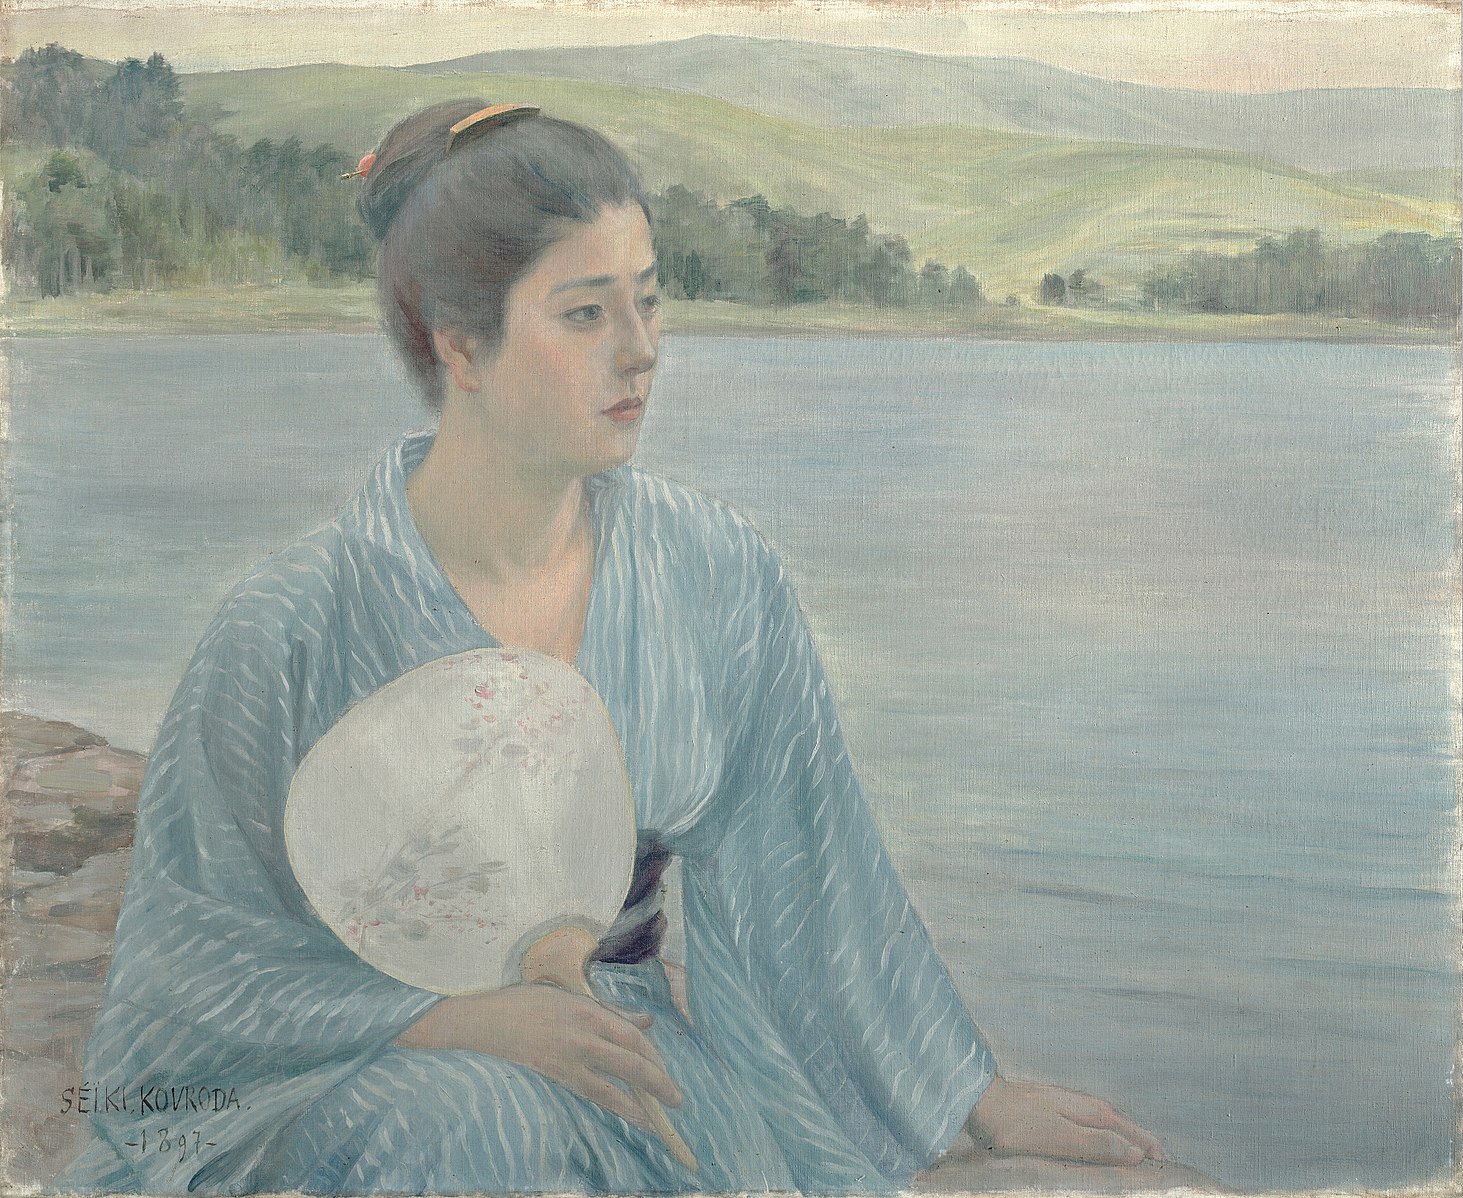 Woman in blue robe holding a fan sitting next to a lake